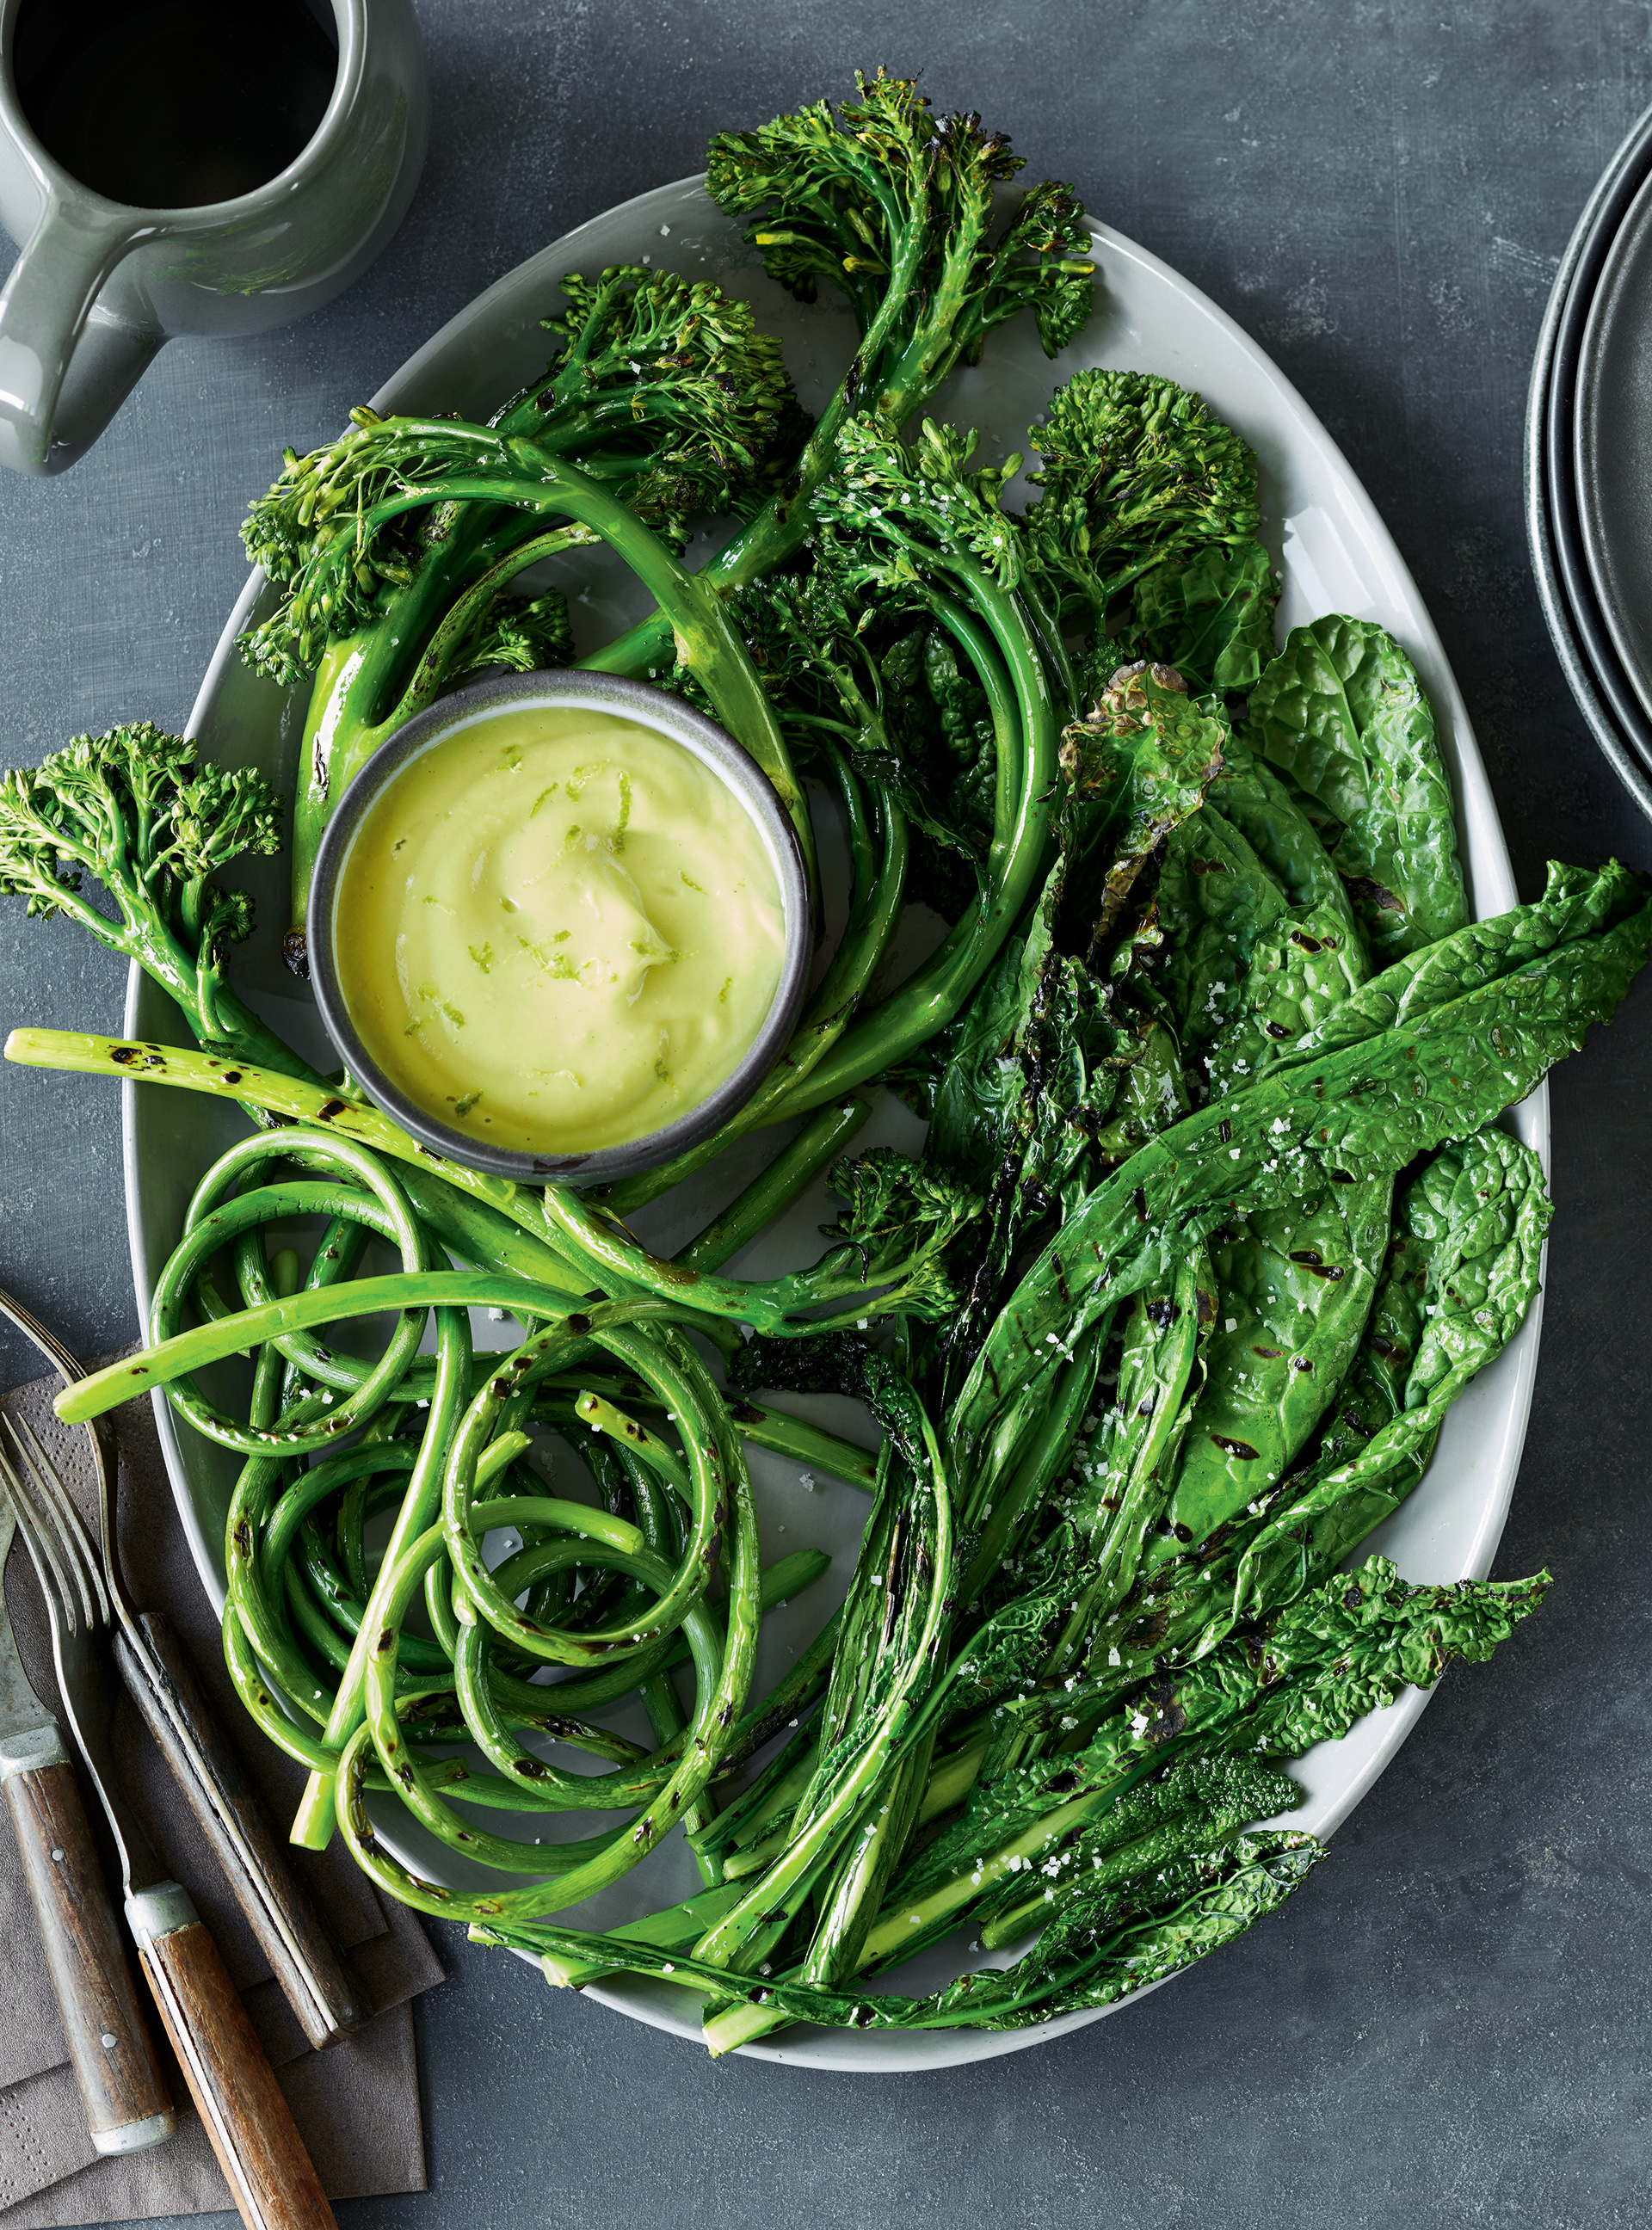 Grilled Green Vegetable and Garlic Scape Platter with Avocado Dip